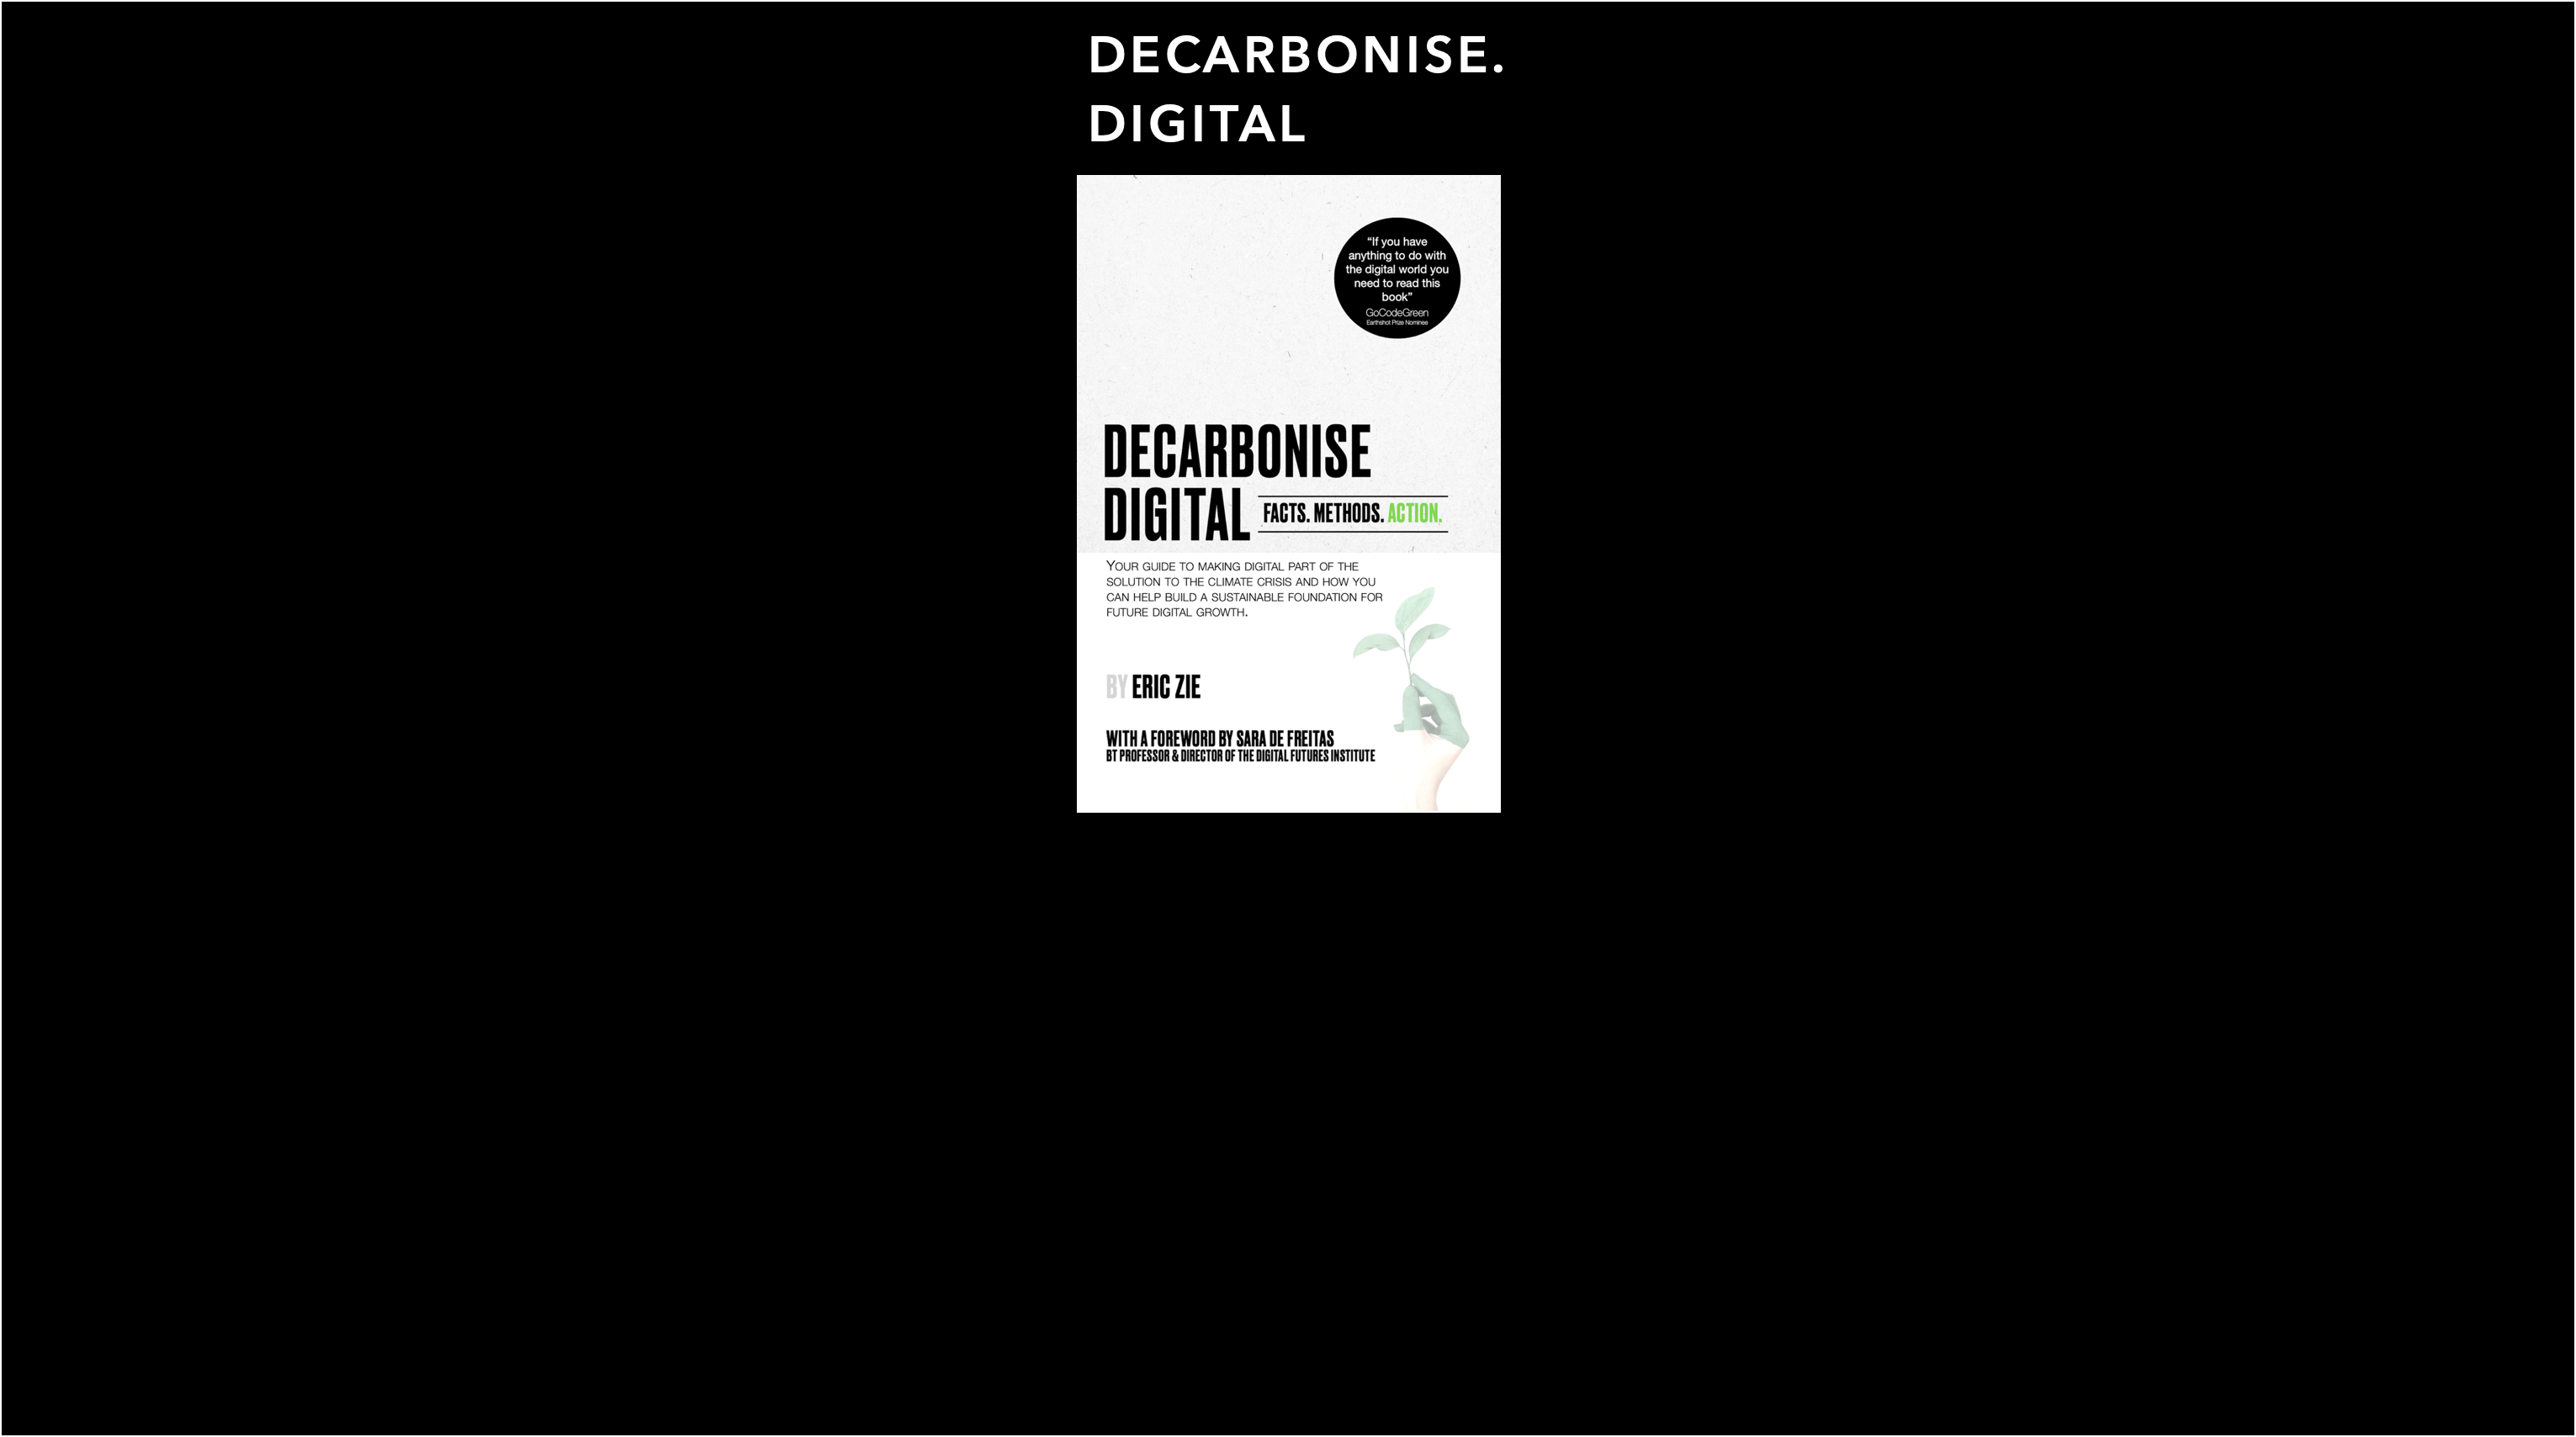 Image of the book decarbonise digital - by Eric Zie